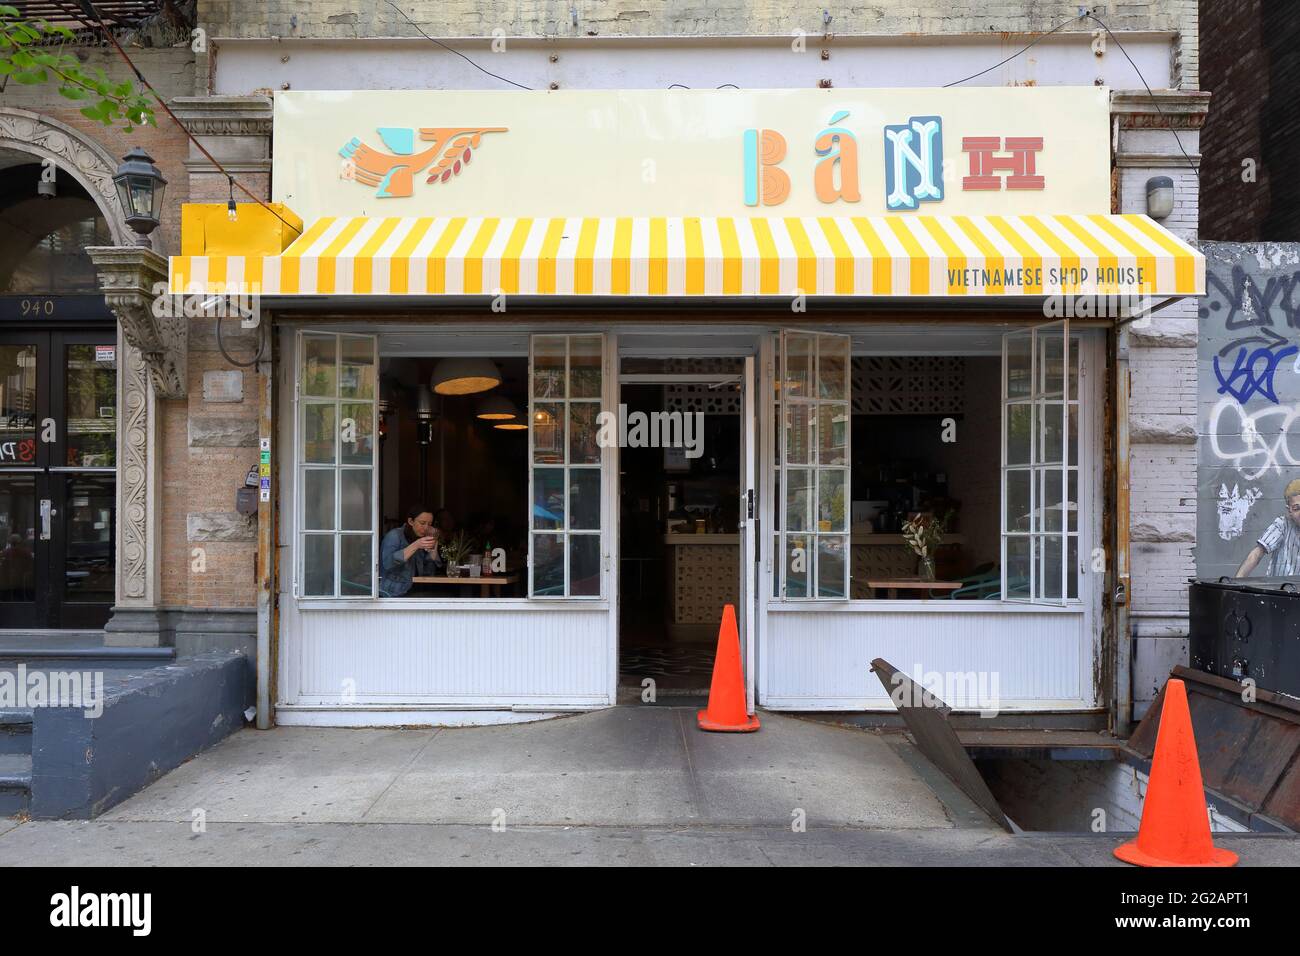 Bánh Vietnamese Shop House, 942 Amsterdam Ave, New York, NYC storefront photo of a Vietnamese restaurant in Manhattan Valley Stock Photo